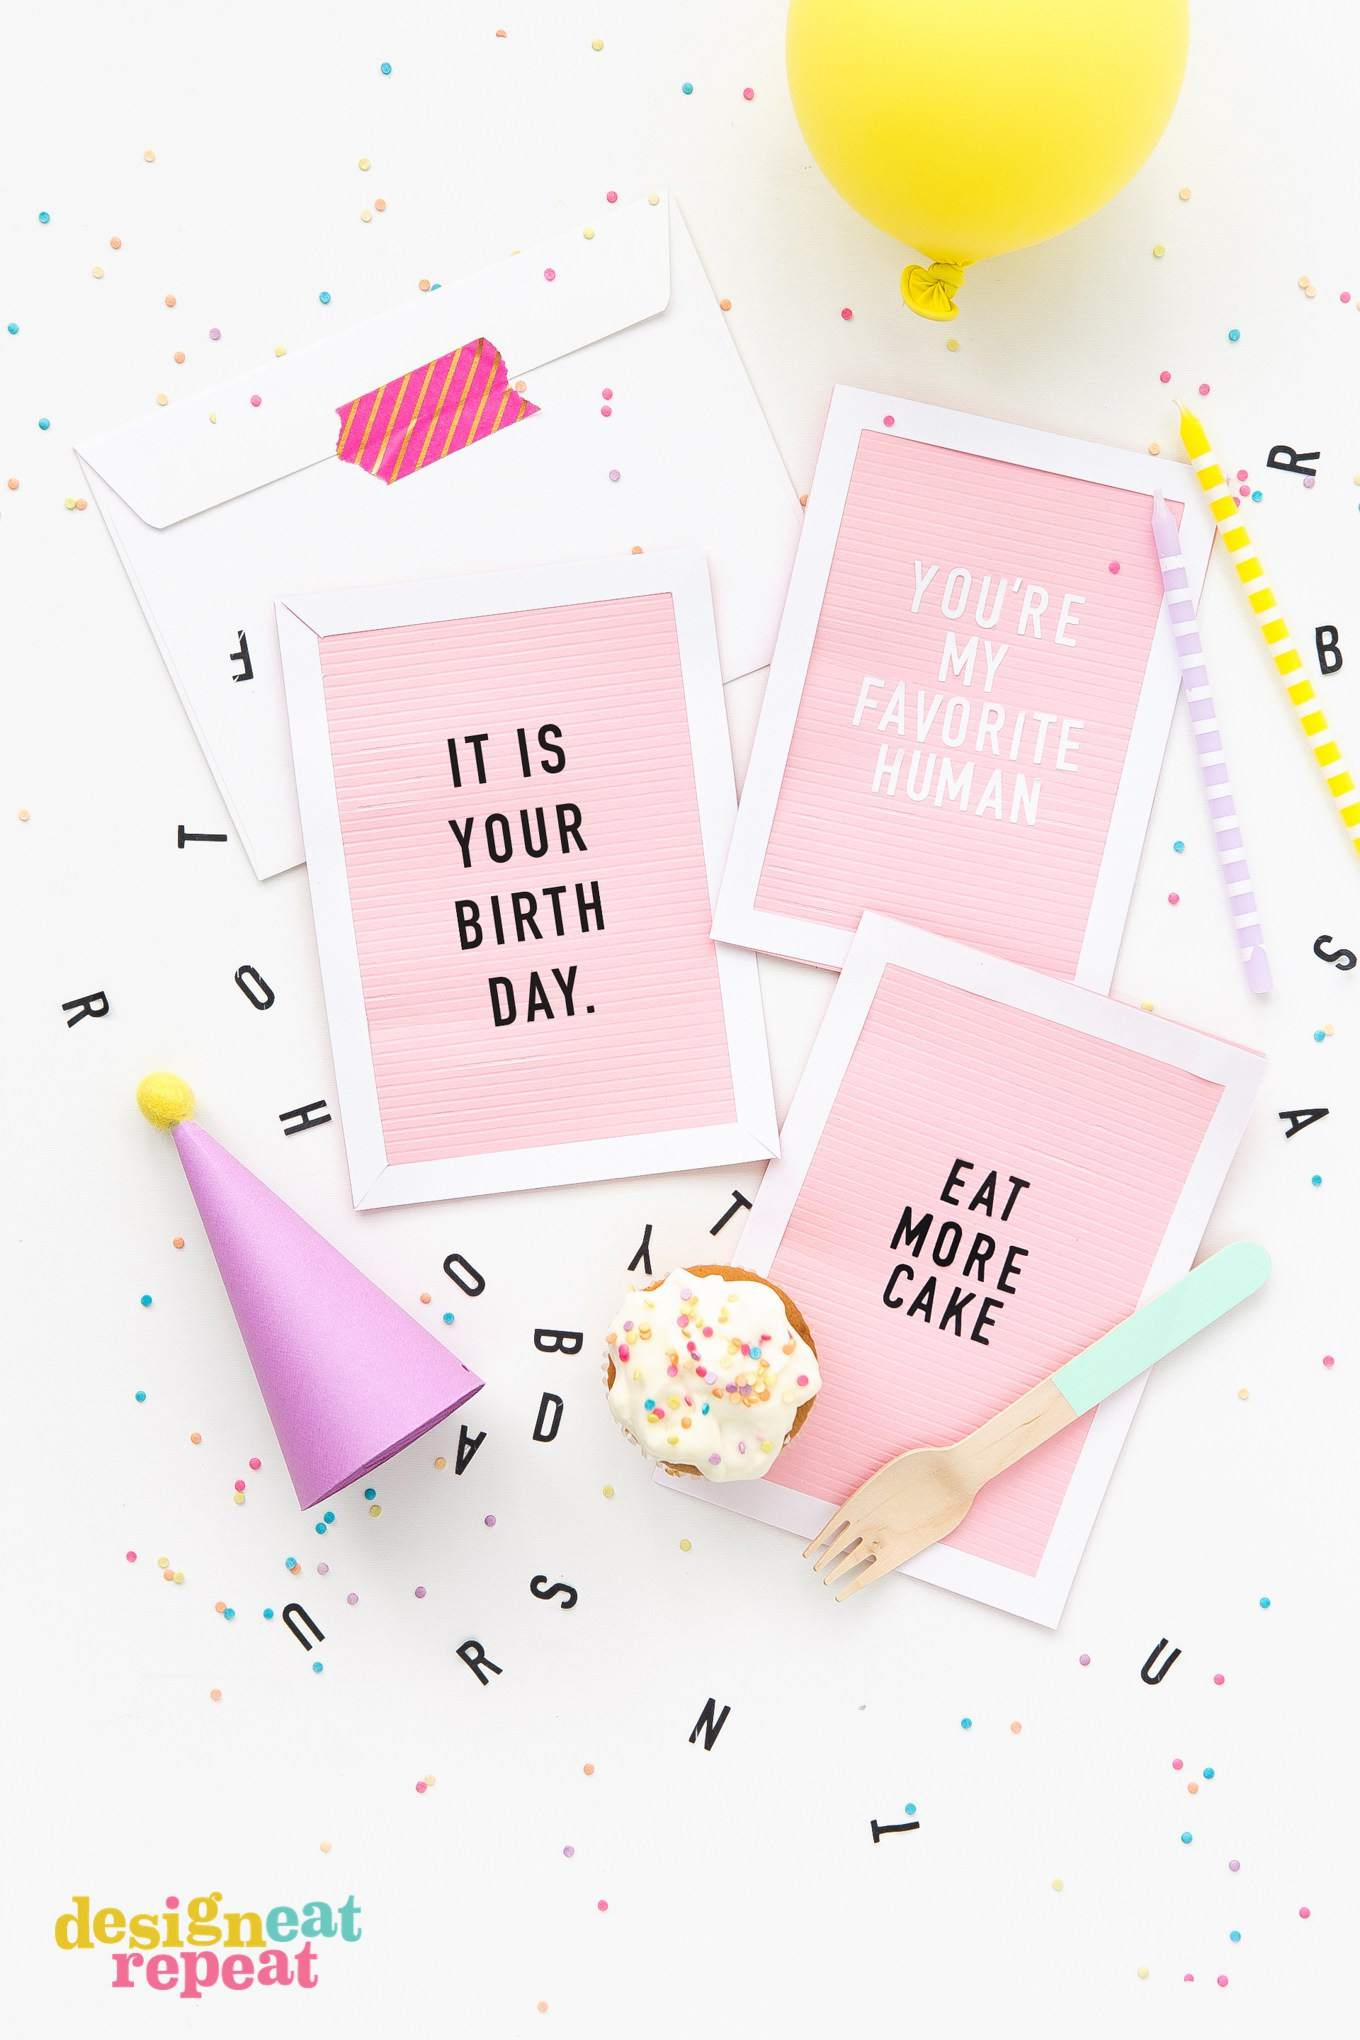 Cute Birthday Card Ideas For Girlfriend Get Inspiration From 25 Of The Best Diy Birthday Cards